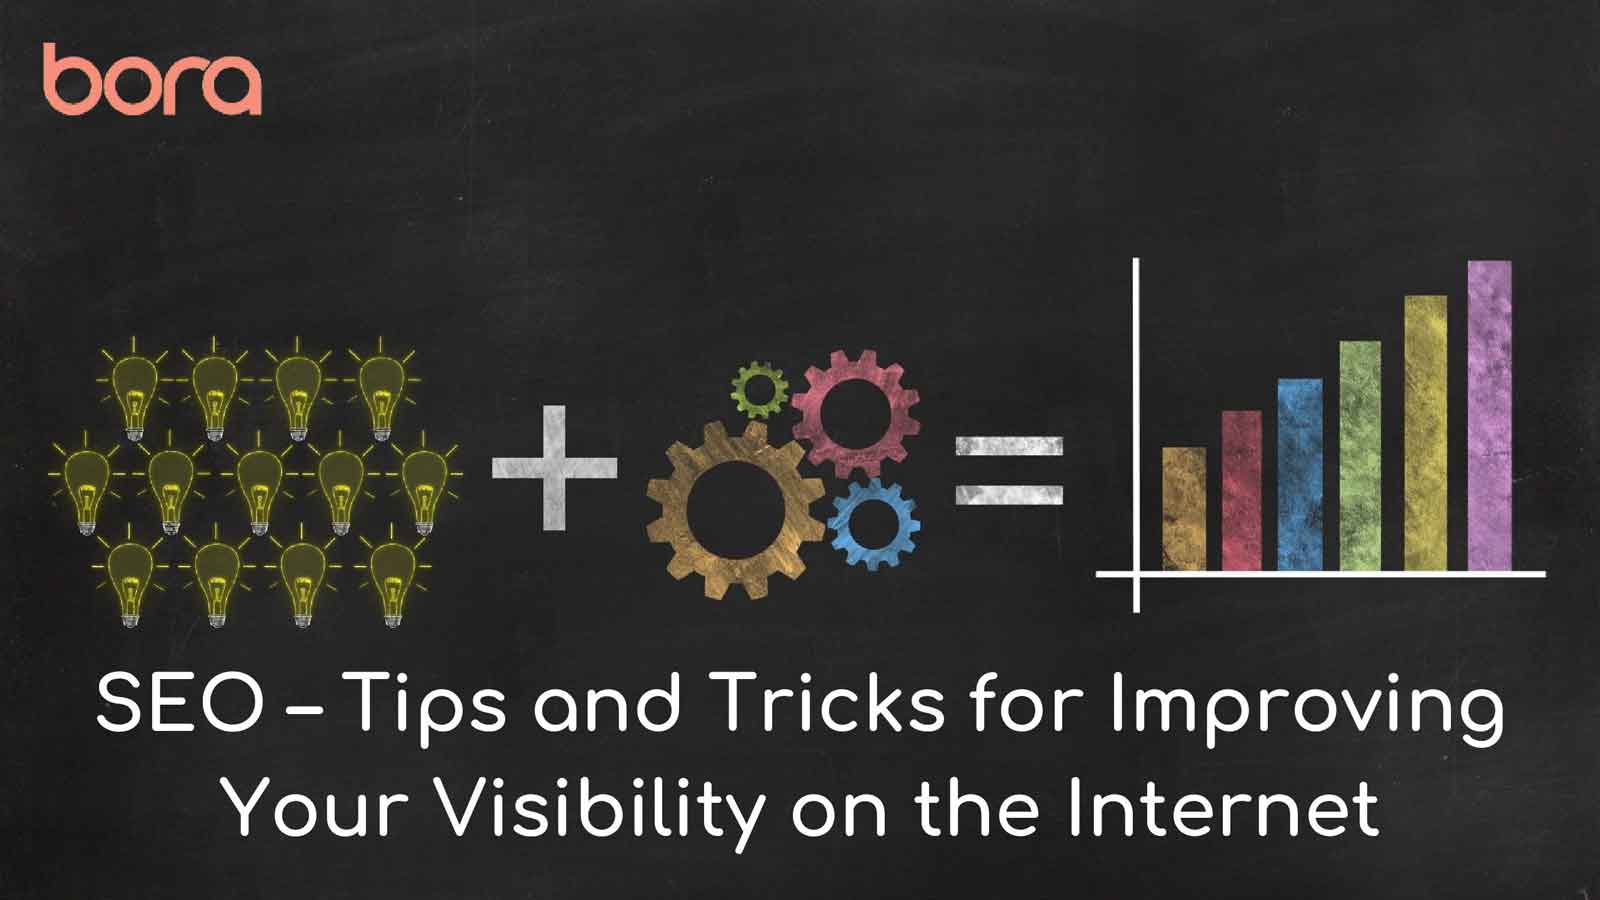 SEO – Tips and Tricks for Improving Your Visibility on the Internet